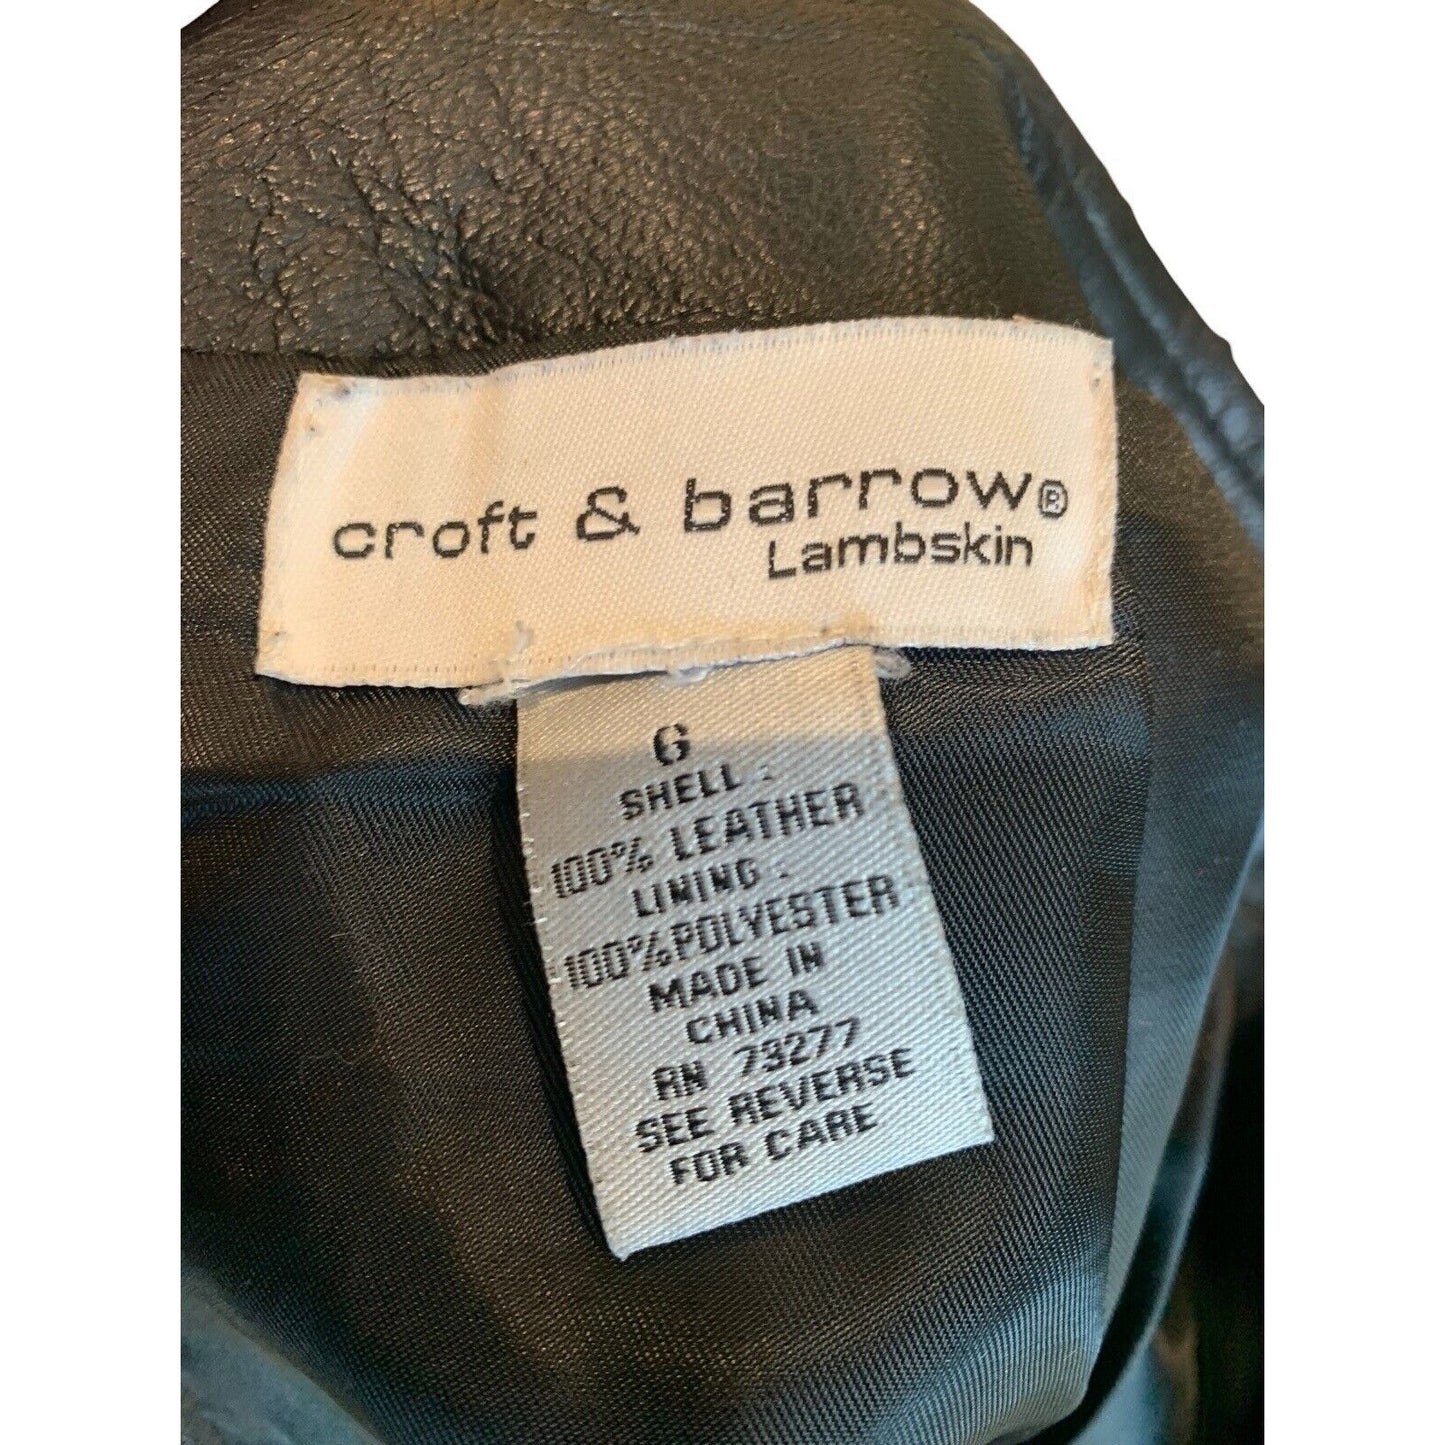 Brand Label And Fabric Info Tag